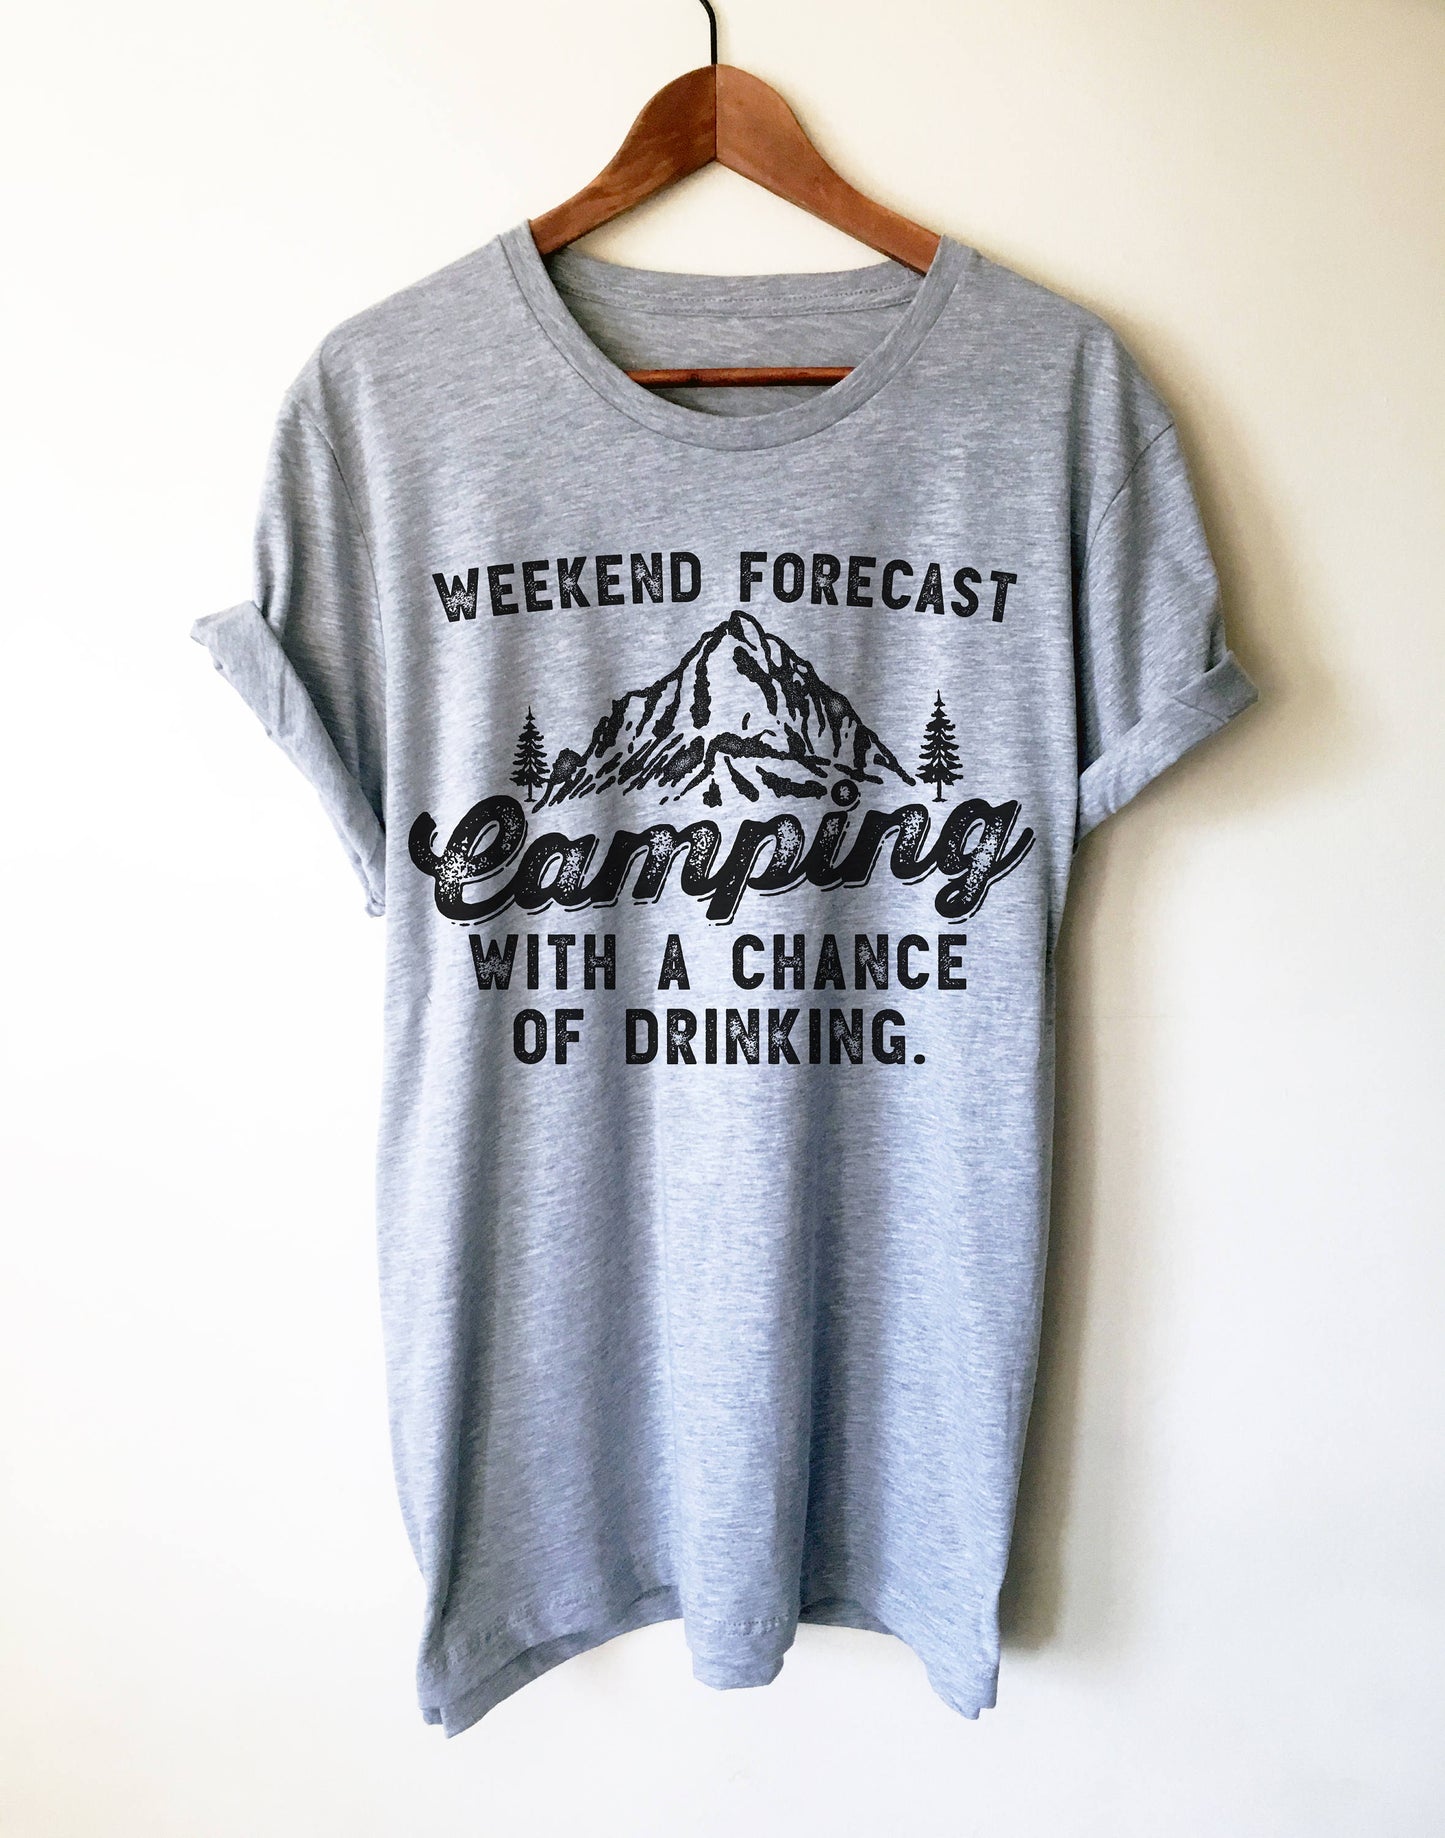 Weekend Forecast Camping With A Chance Of Drinking Unisex Shirt, Camping Shirt, Happy Camper Shirt, Mountain Shirt, Camping Gift, Road Trip